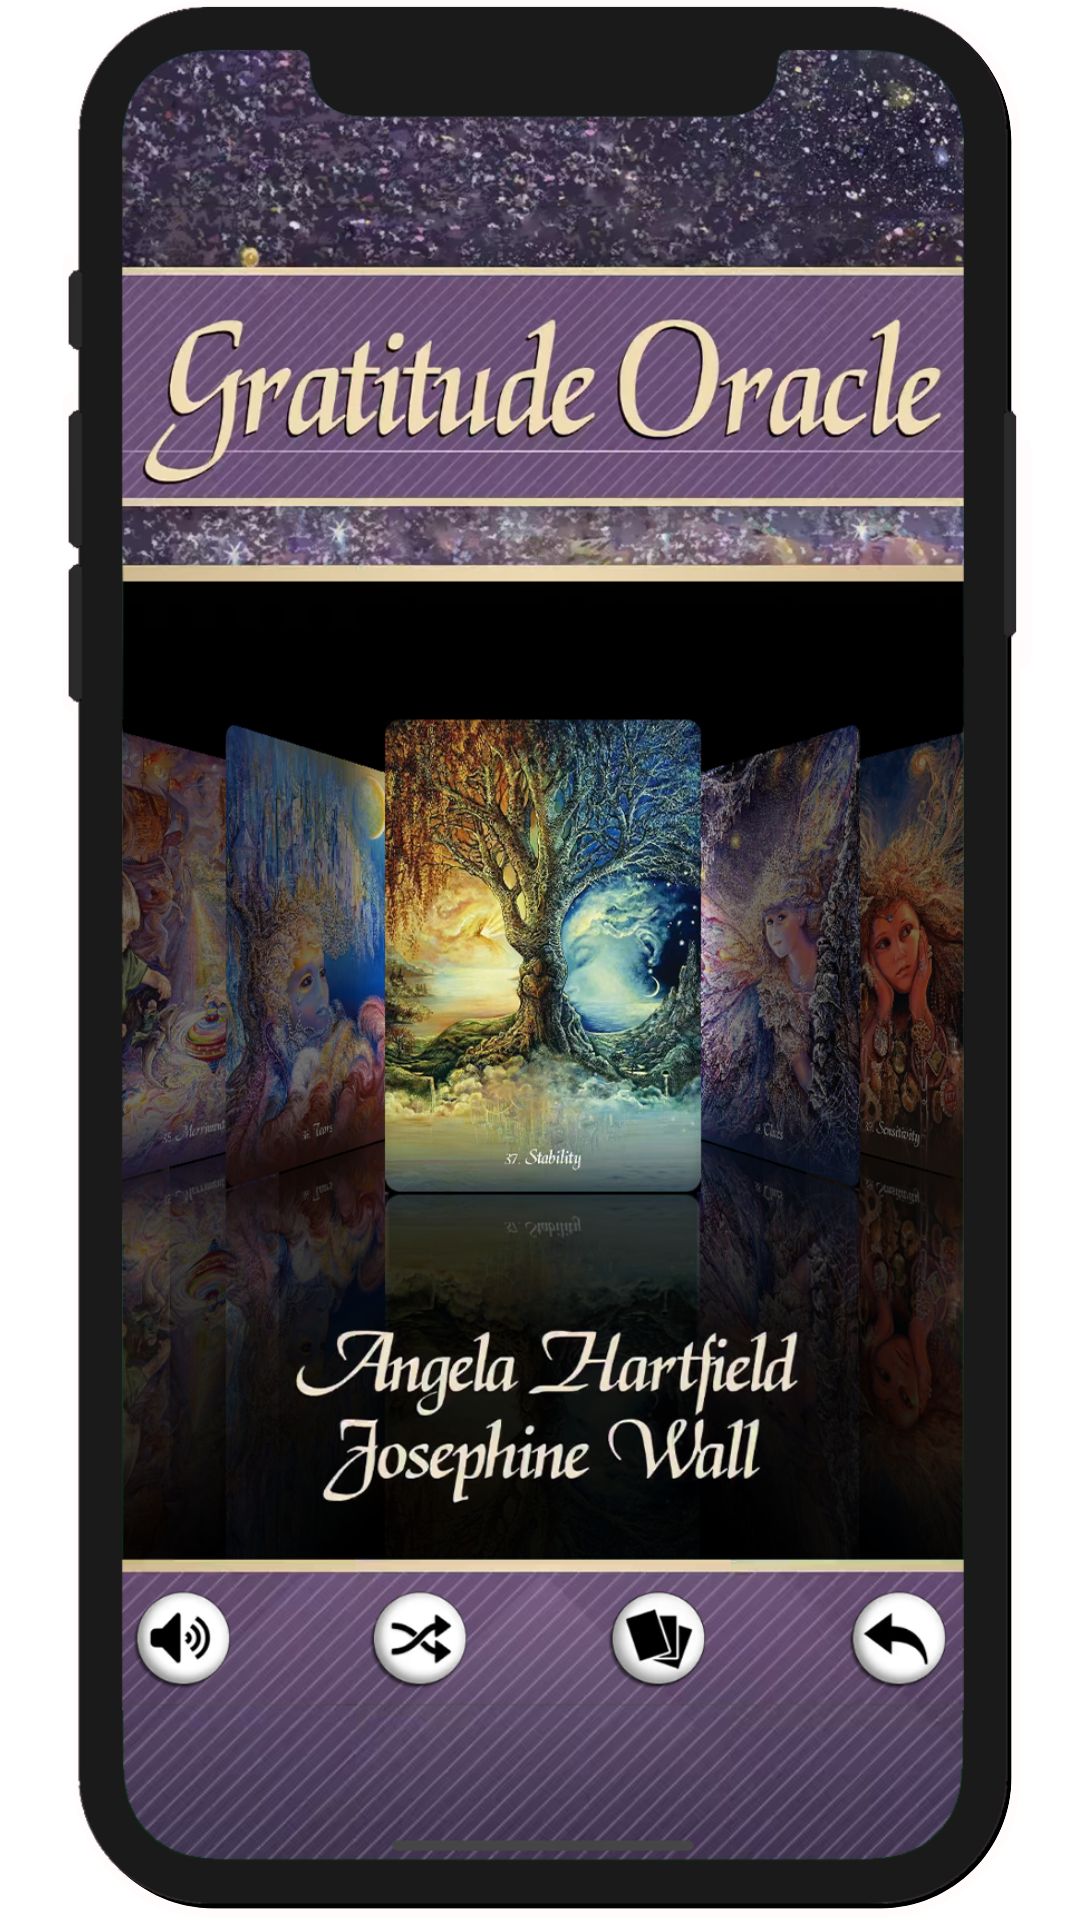 The Gratitude Oracle by Angela Hartfield